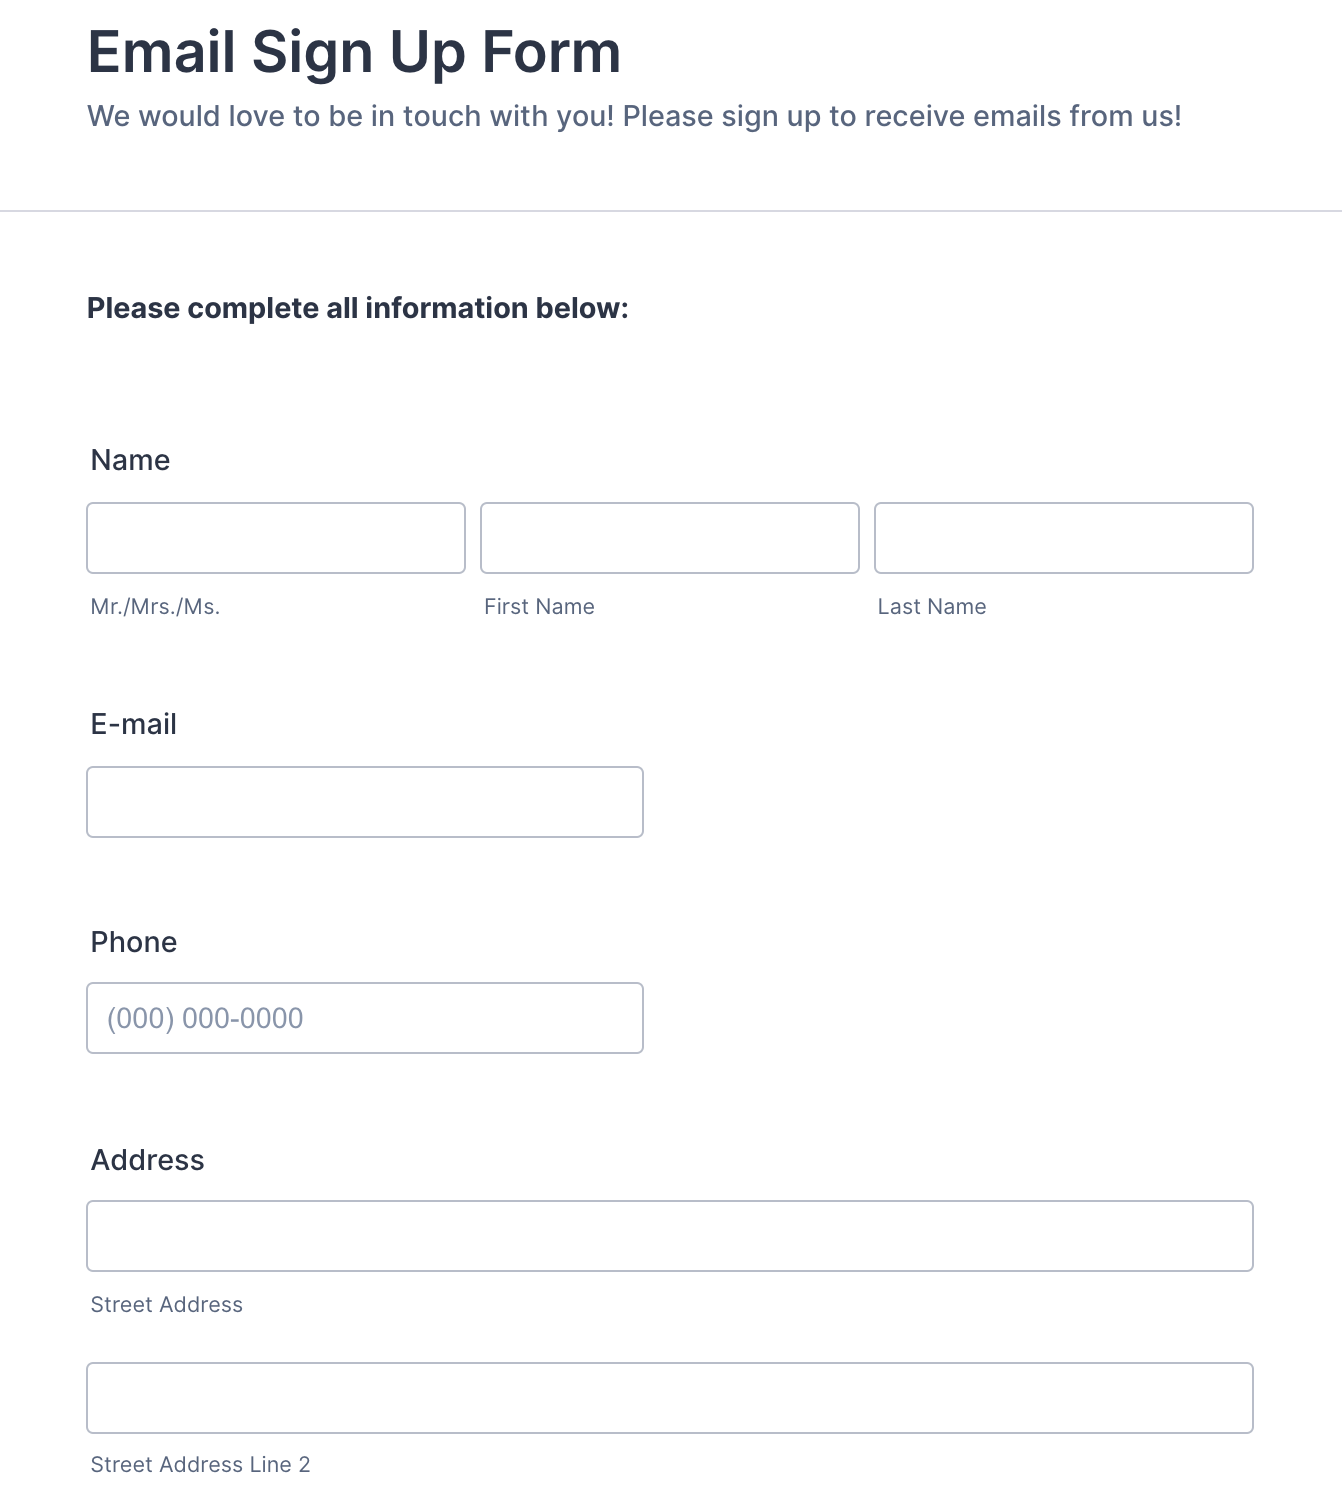 Jotform's E-mail Signup Form Template